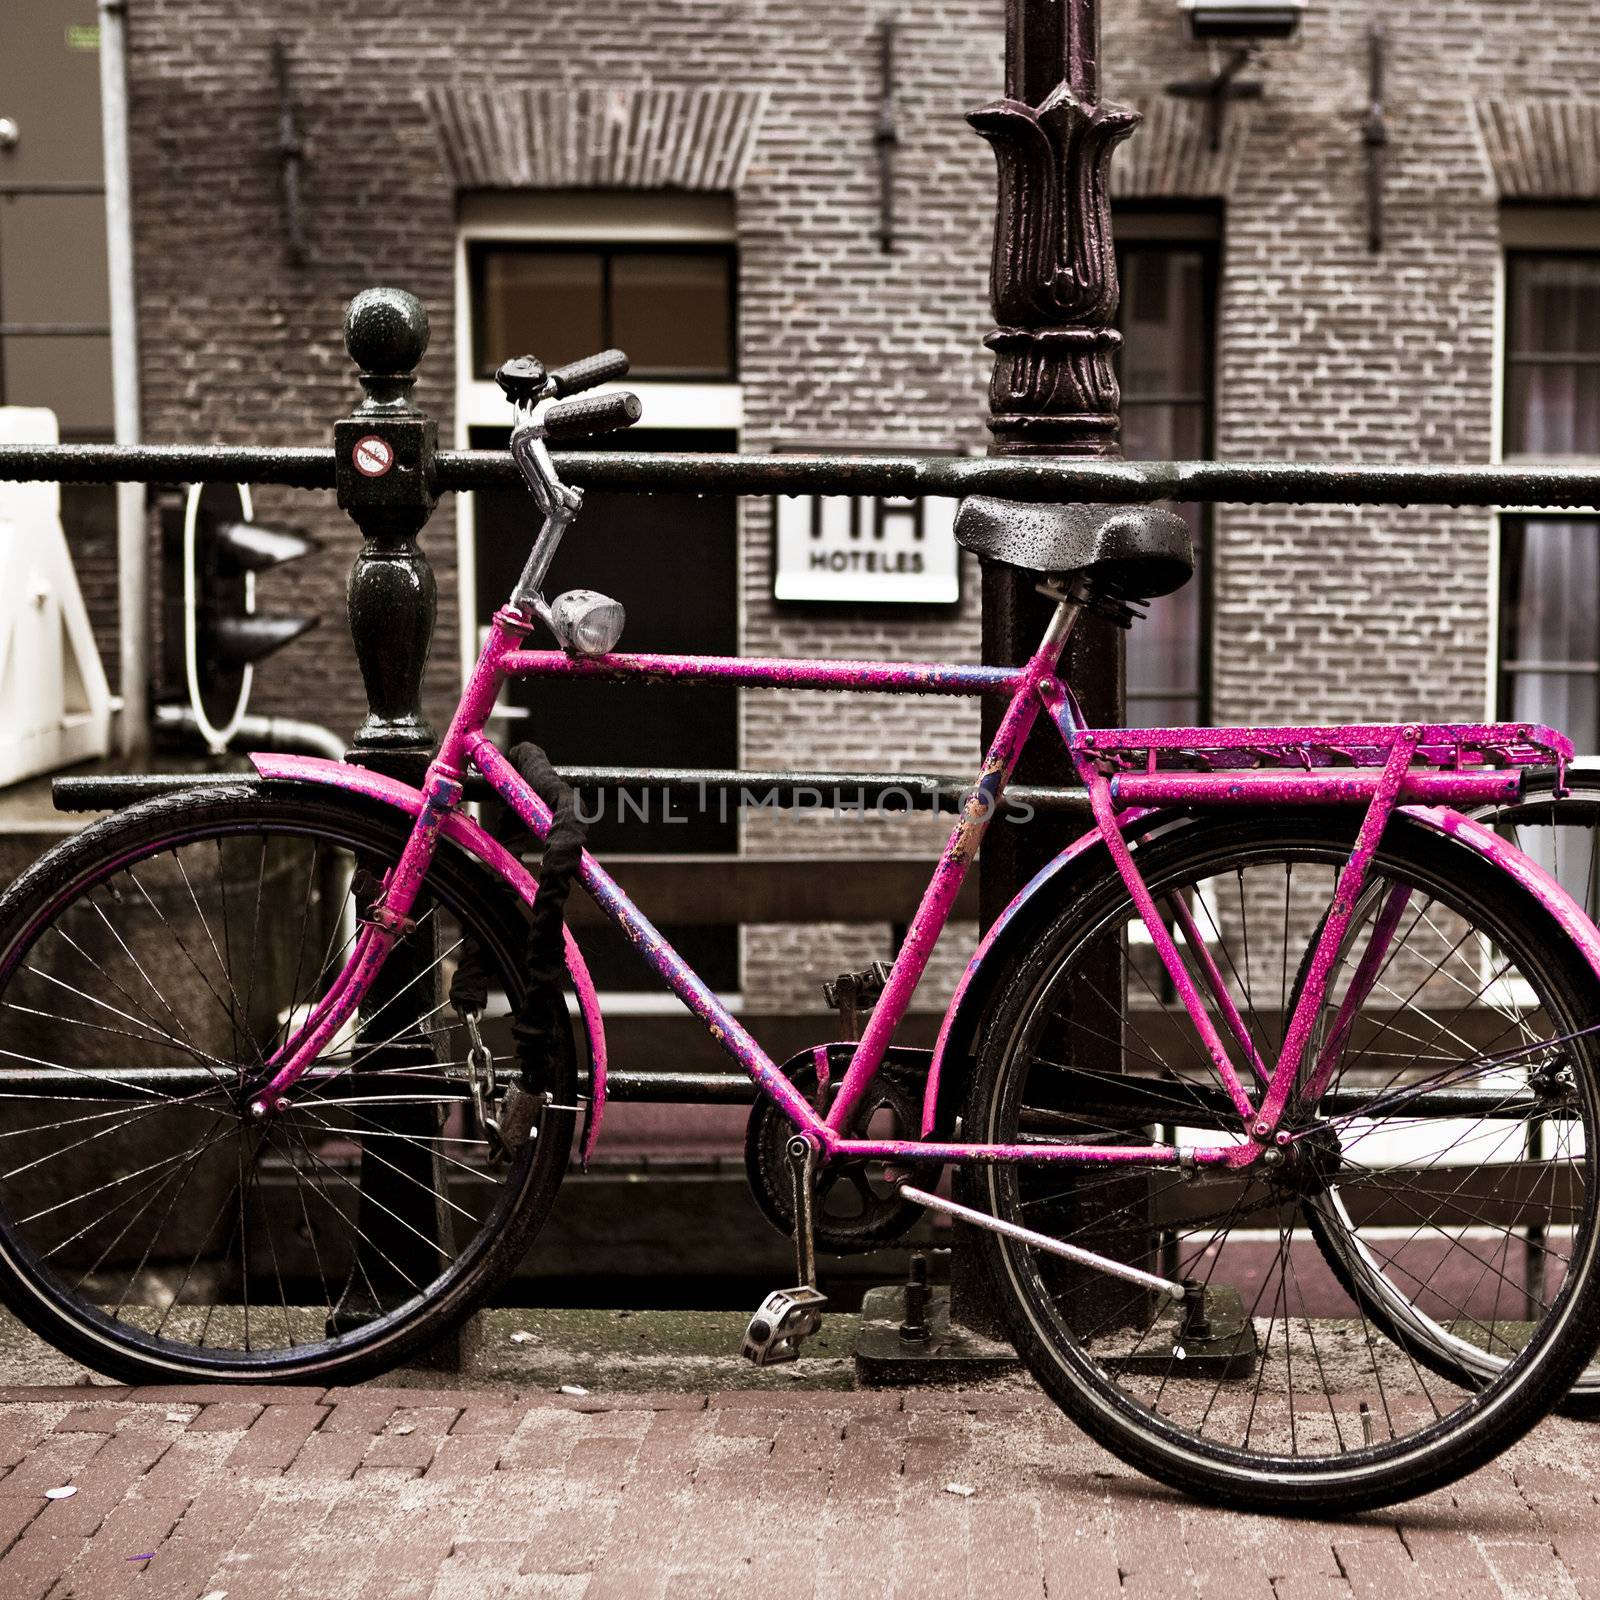 Holland Bicycles by Iko